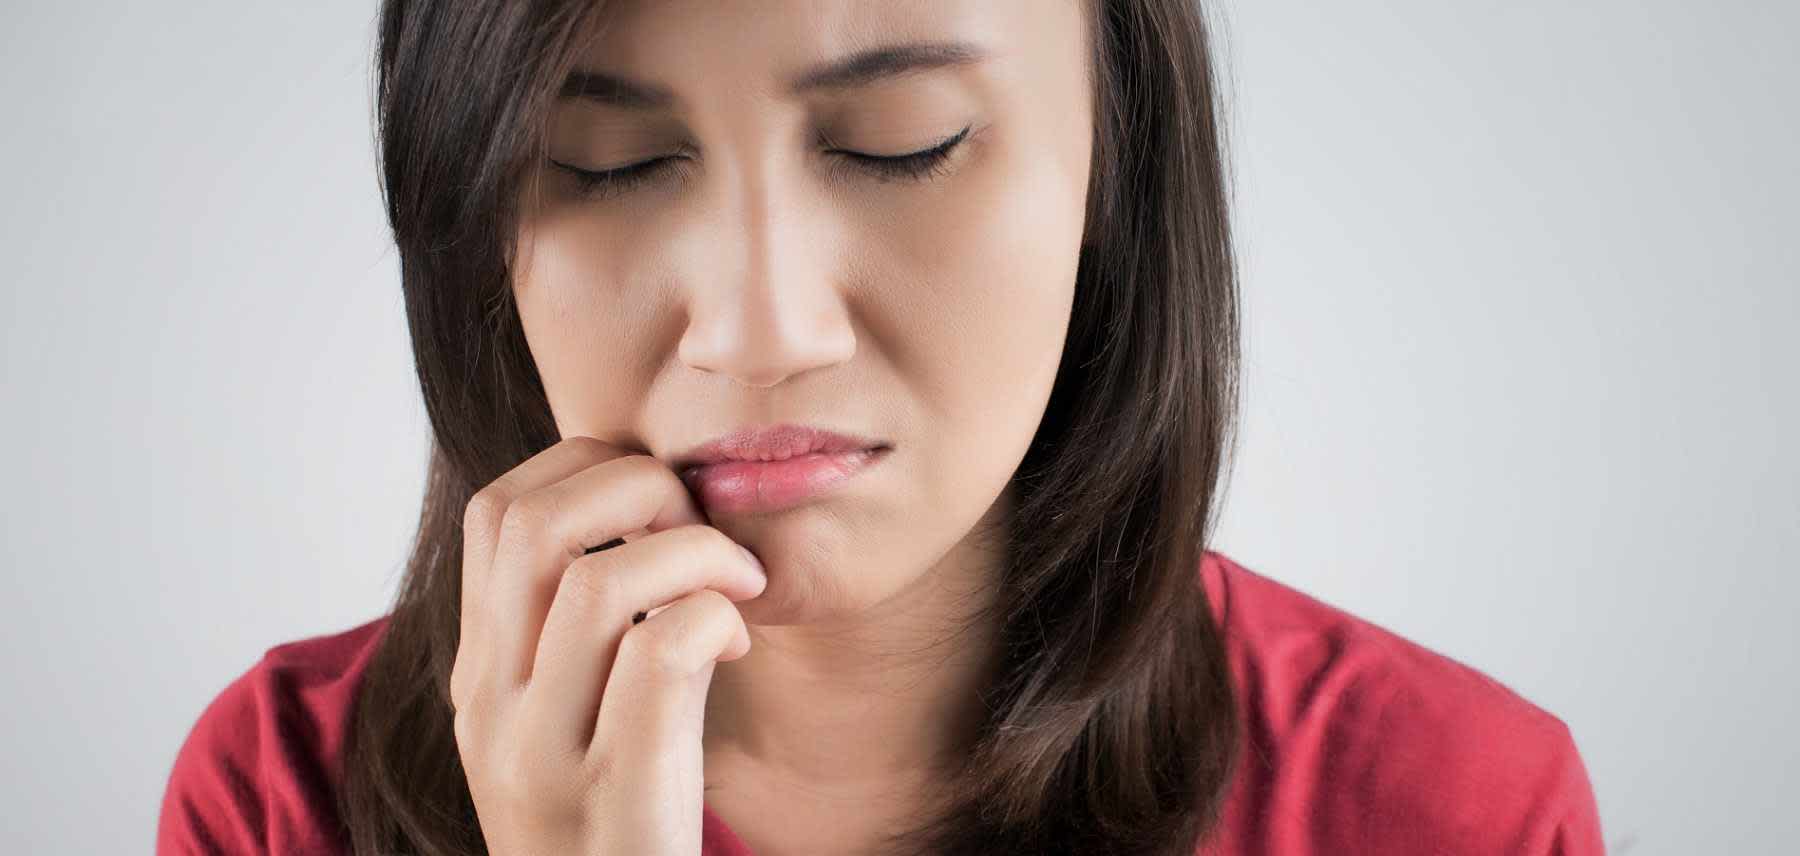 Young woman with painful sore wondering what are the signs of STDs in your mouth